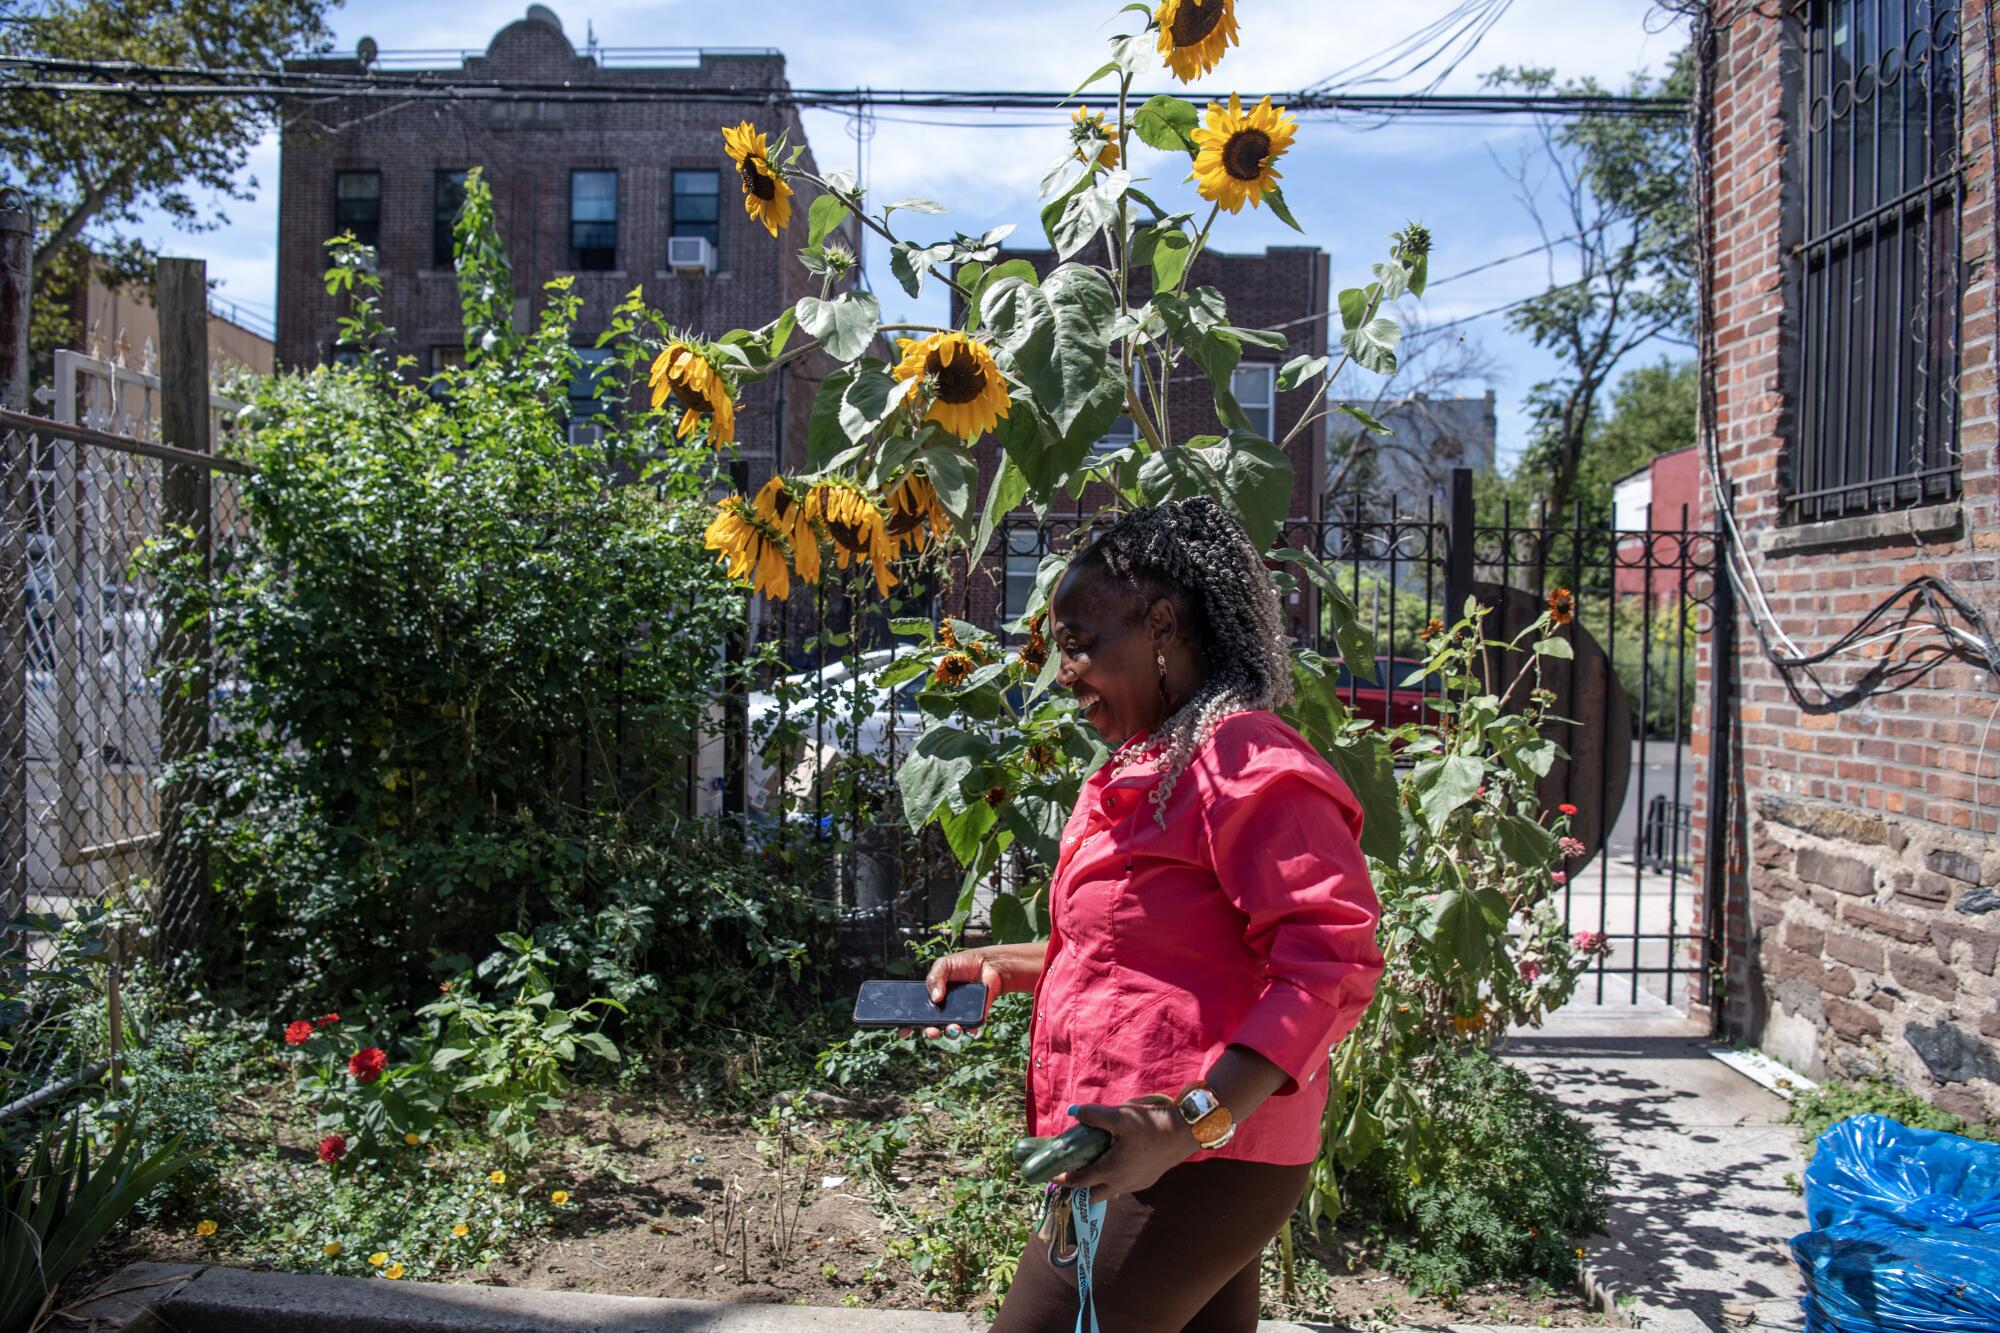 Sunflowers tower over a woman as she walks through a small garden inside the gates of a brick building